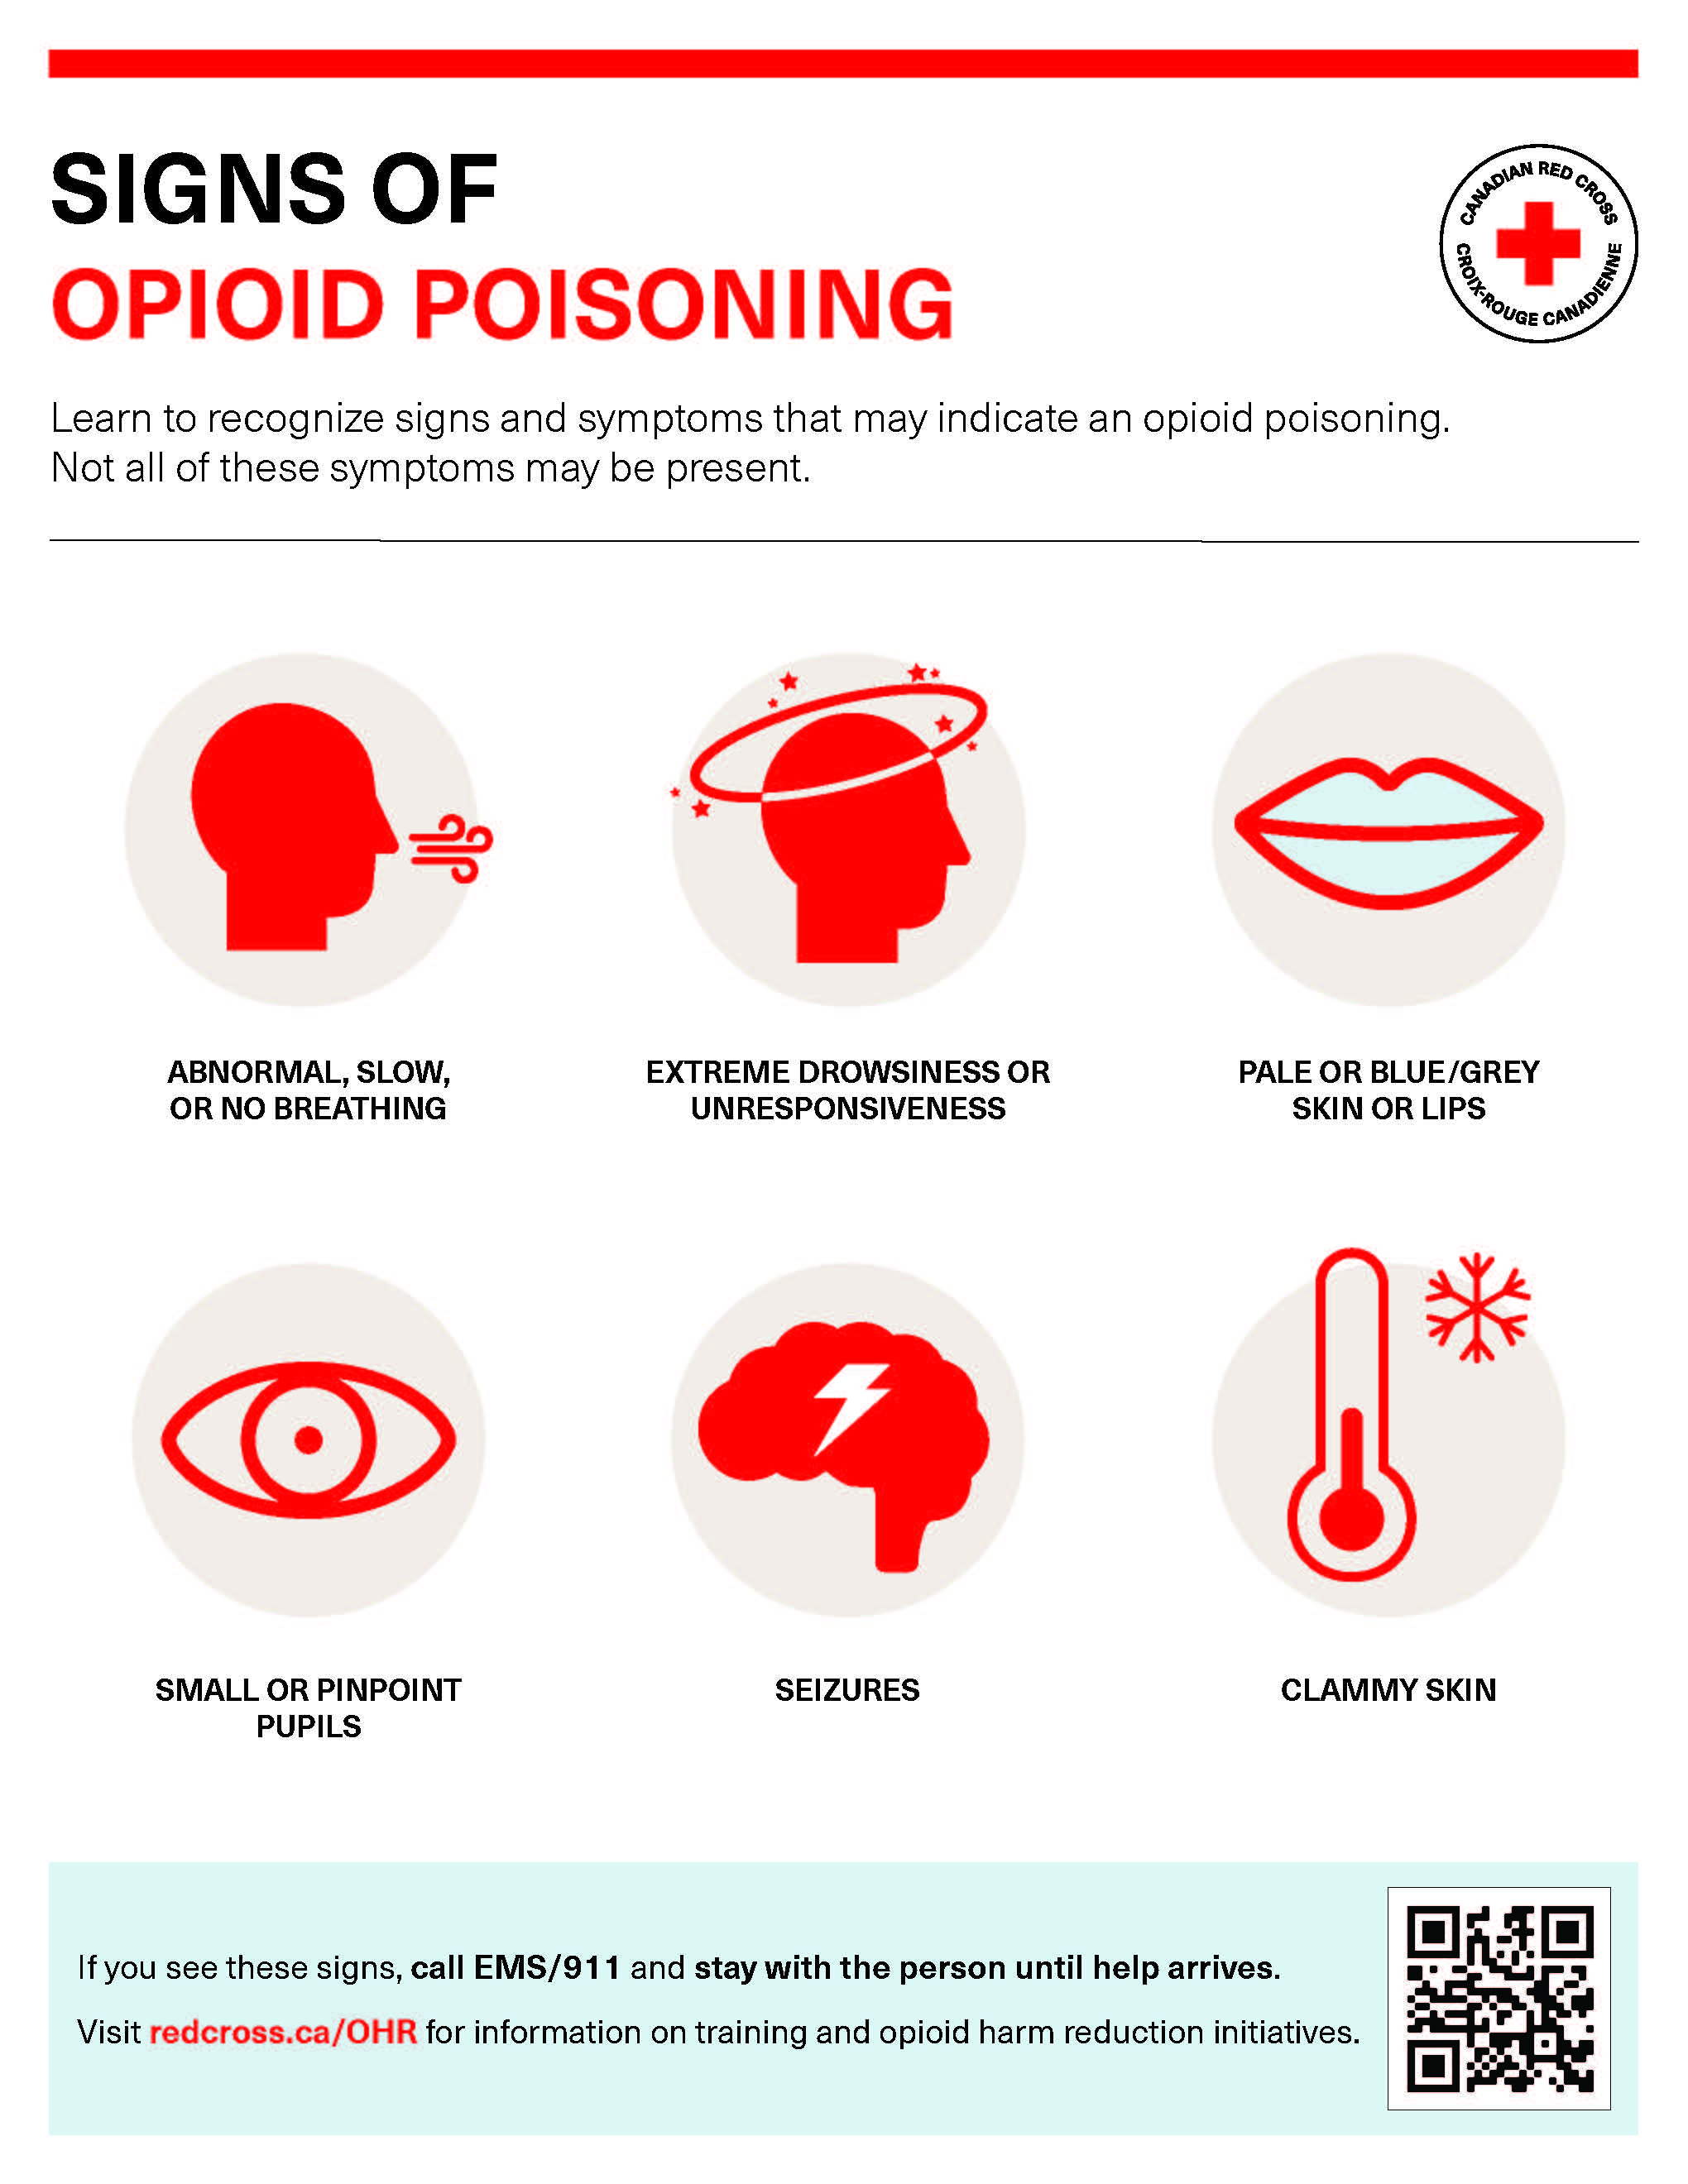 Poster of Signs of Opioid Poisoning by the Canadian Red Cross: learn to recognize signs and symptoms that may indicate an opioid poisoning. Not all of these symptoms may be present.  Abnormal, slow or no breathing Extreme drowsiness or unresponsiveness Pale or blue/grey skin or lips Small or pinpoint pupils Seizures Clammy skin If you see these signs, call EMS/911 and stay with the person until help arrives. Visit redcross.ca/OHR for information on training and opioid harm reduction initiatives.